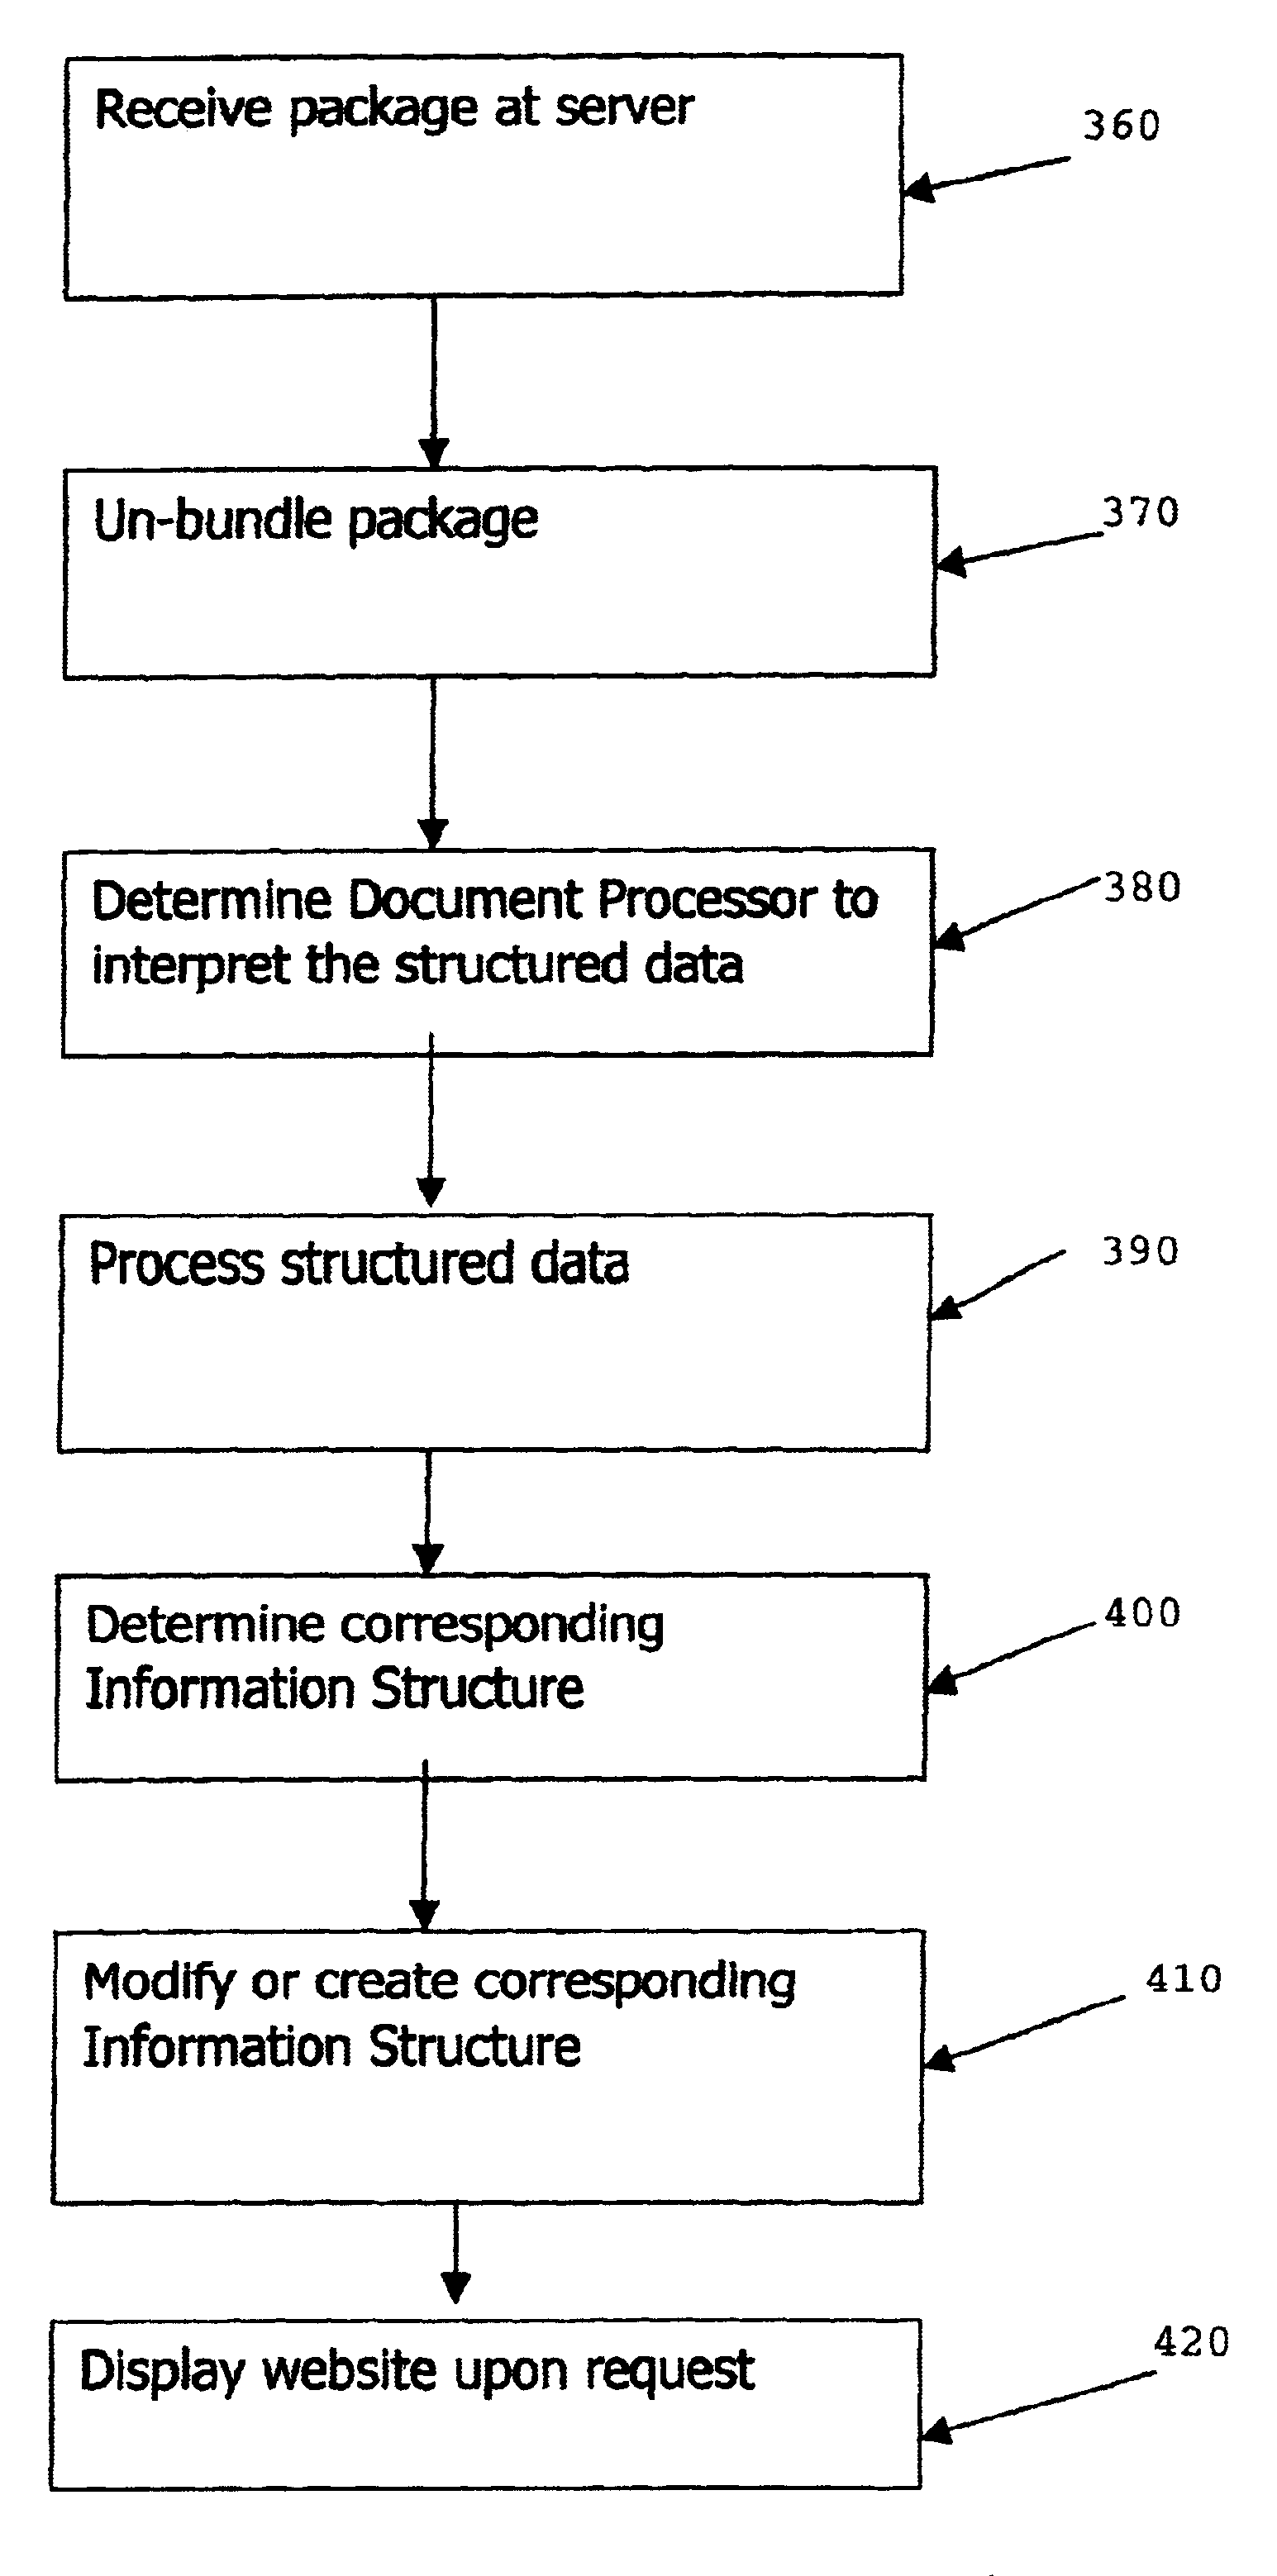 Automatic transfer and expansion of application-specific data for display at a website